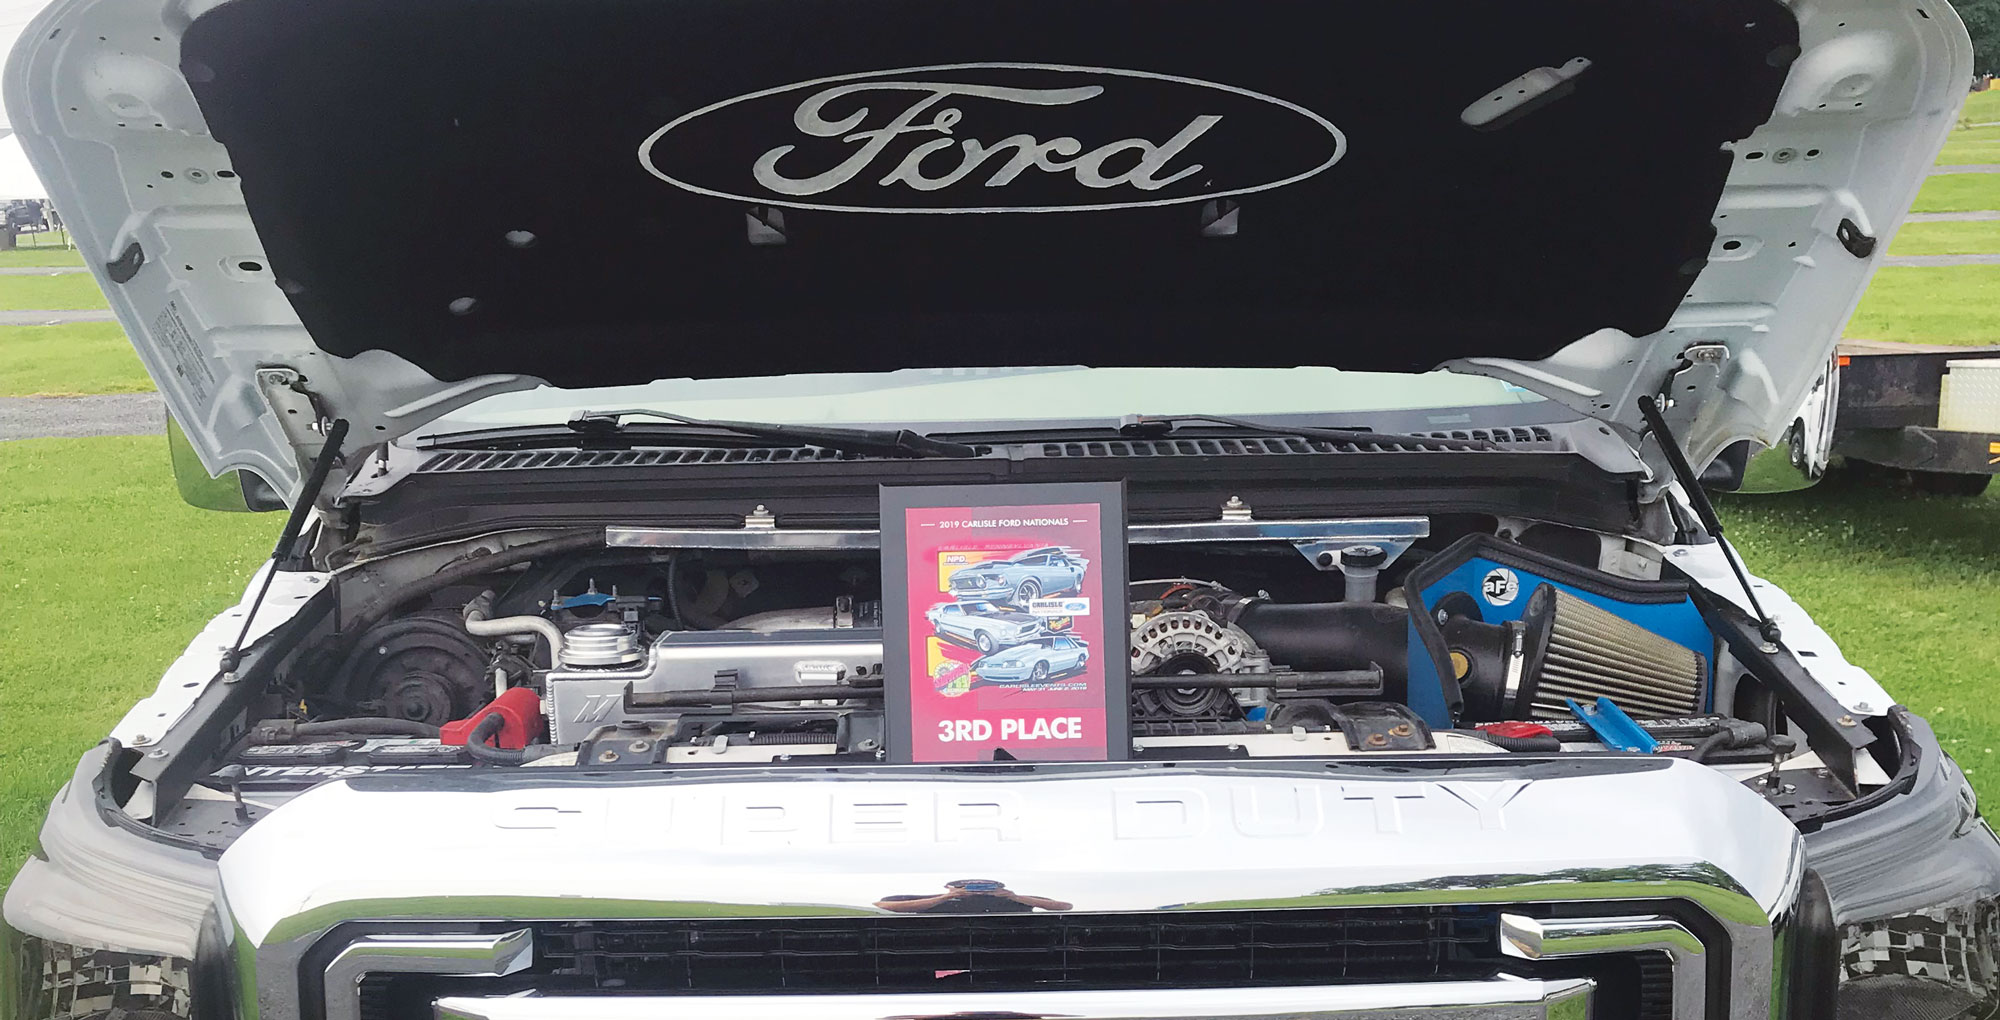 3rd place Ford truck